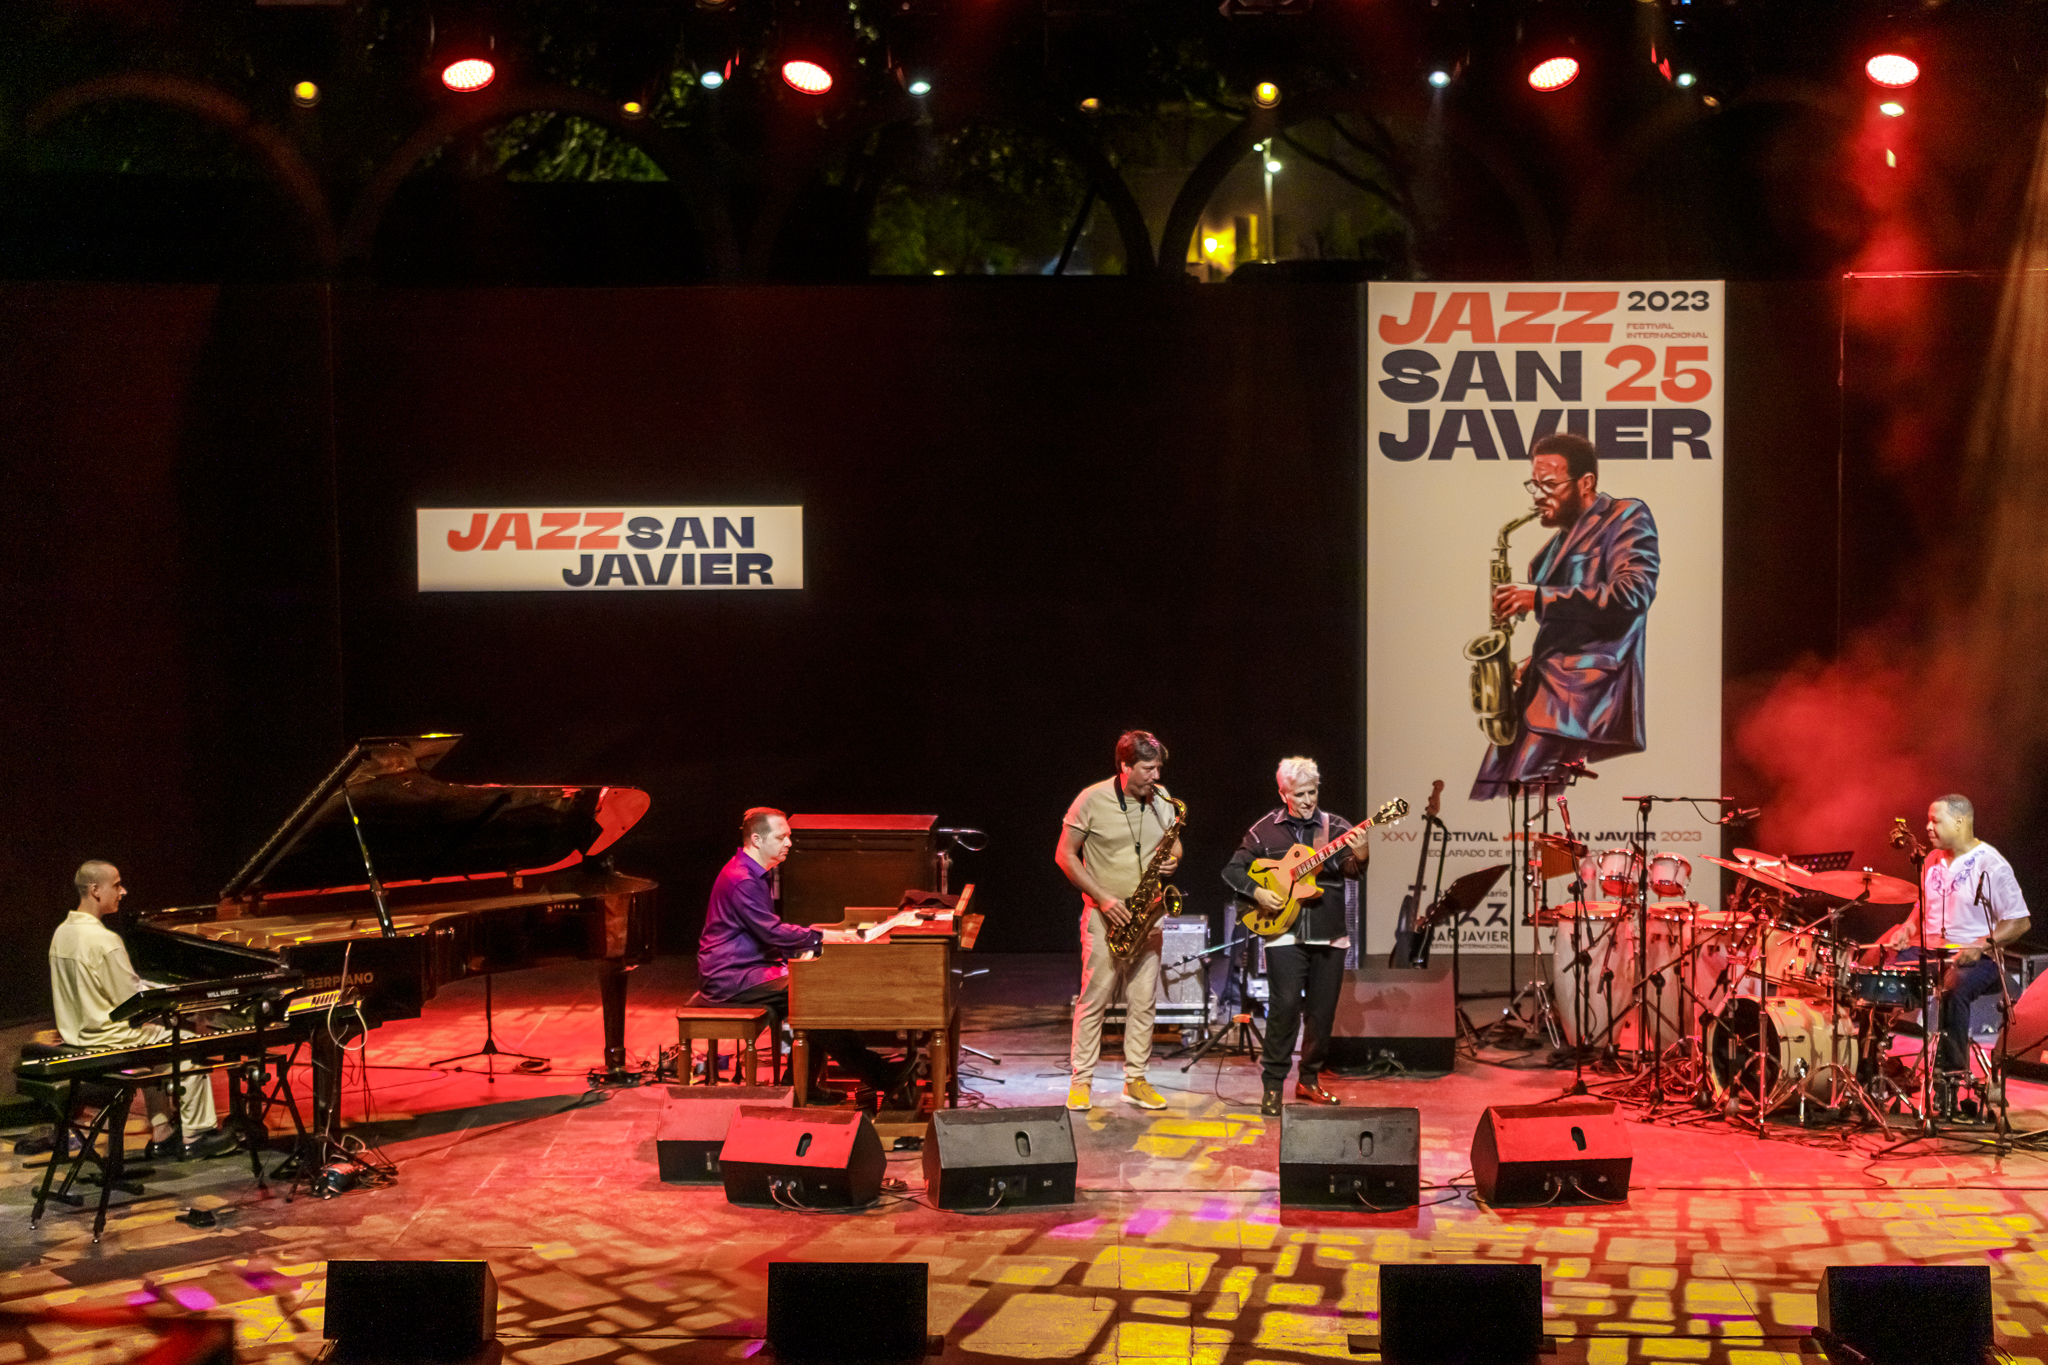 On October 14, the broadcast of concerts from the XXV Edition of the San Javier Jazz Festival begins on 7 TV